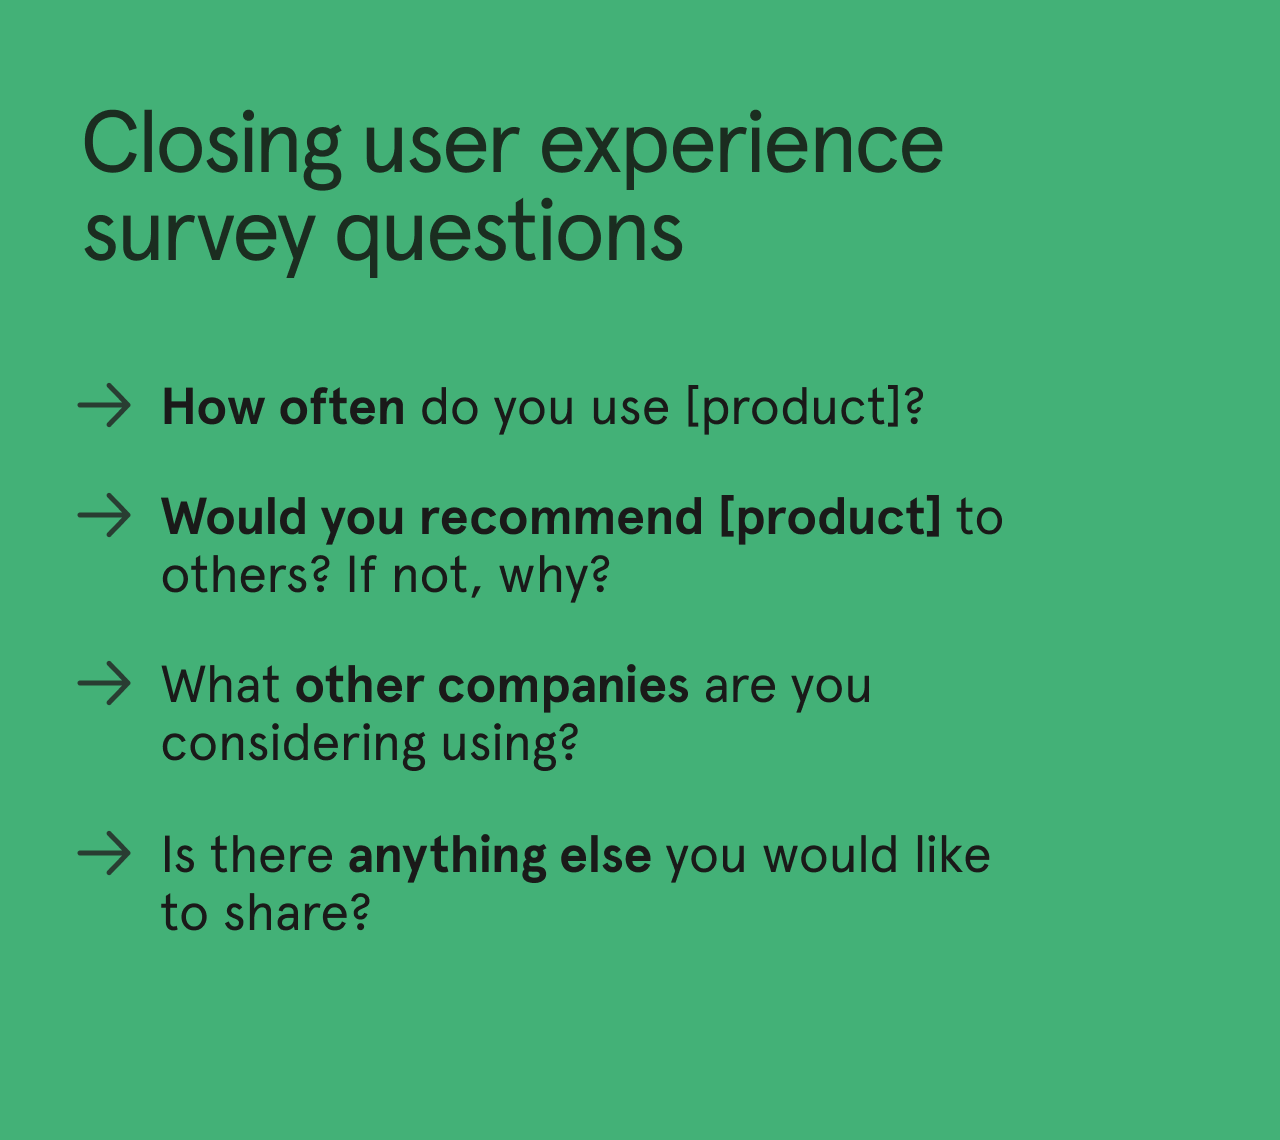 List of closing user experience survey questions.